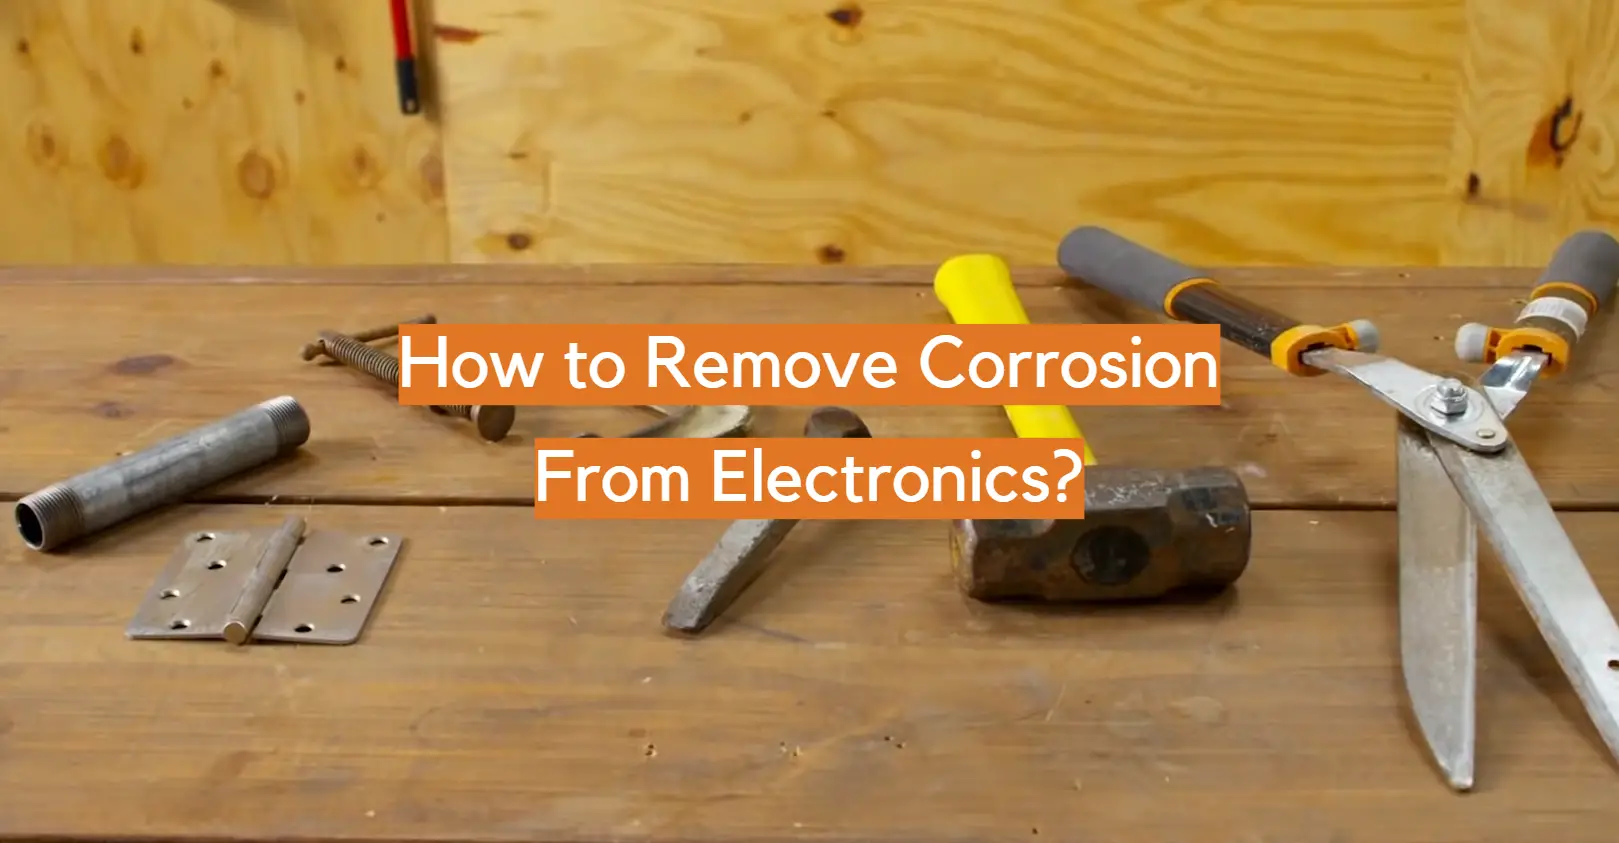 How to Remove Corrosion From Electronics?